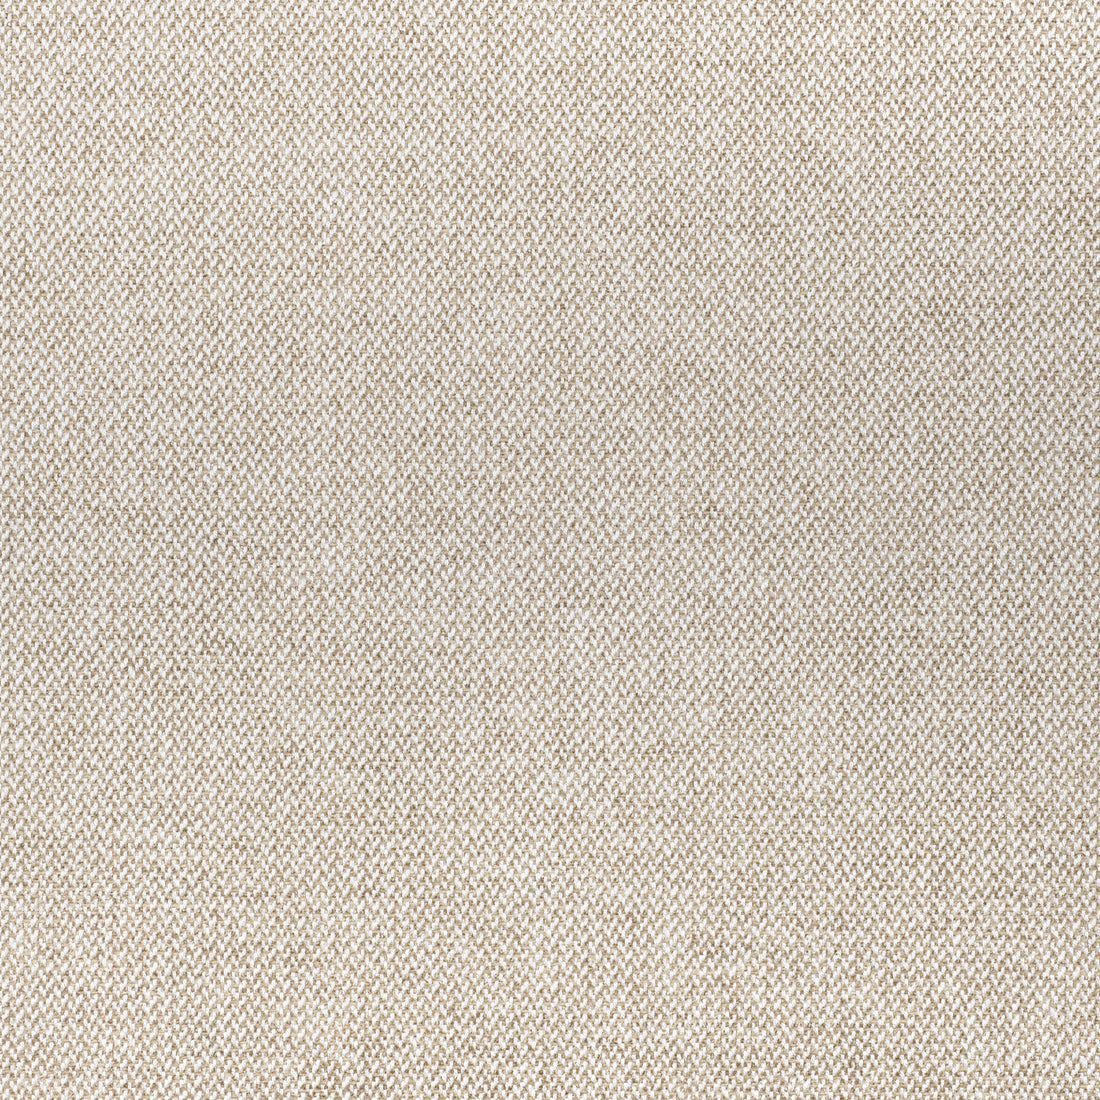 Picco fabric in flax color - pattern number W80704 - by Thibaut in the Woven Resource 11: Rialto collection